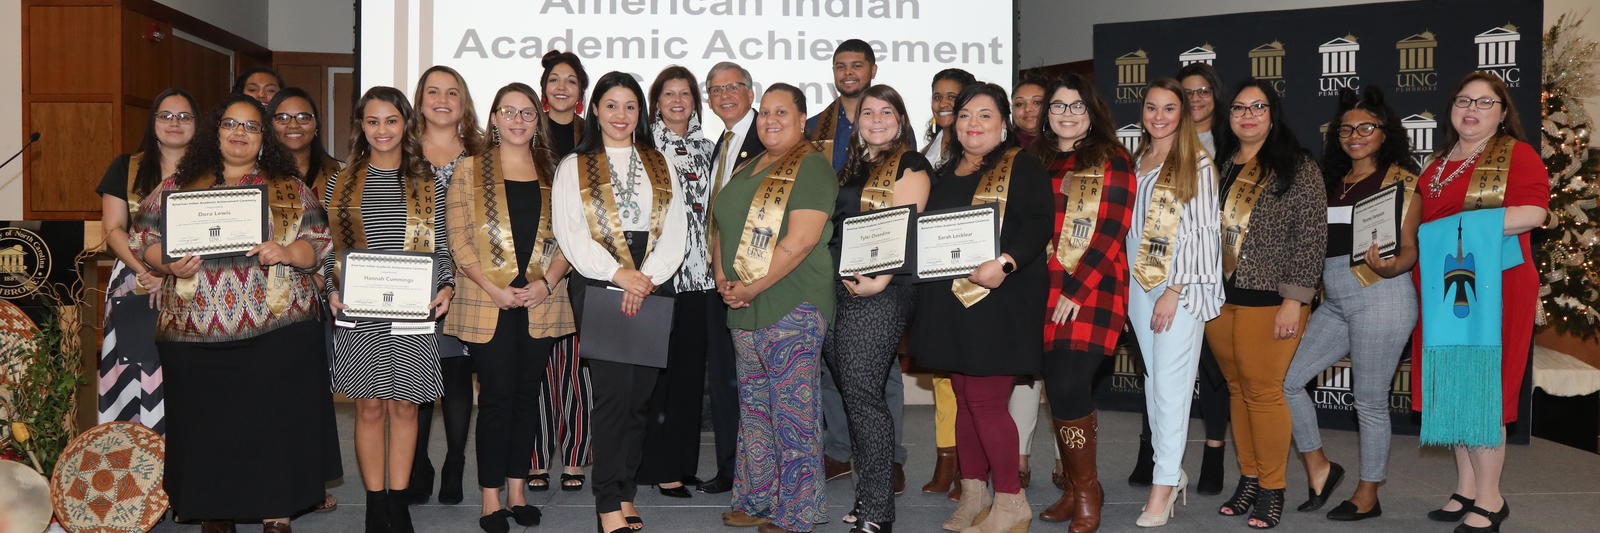 Students at the American Indian Academic Achievement Ceremony